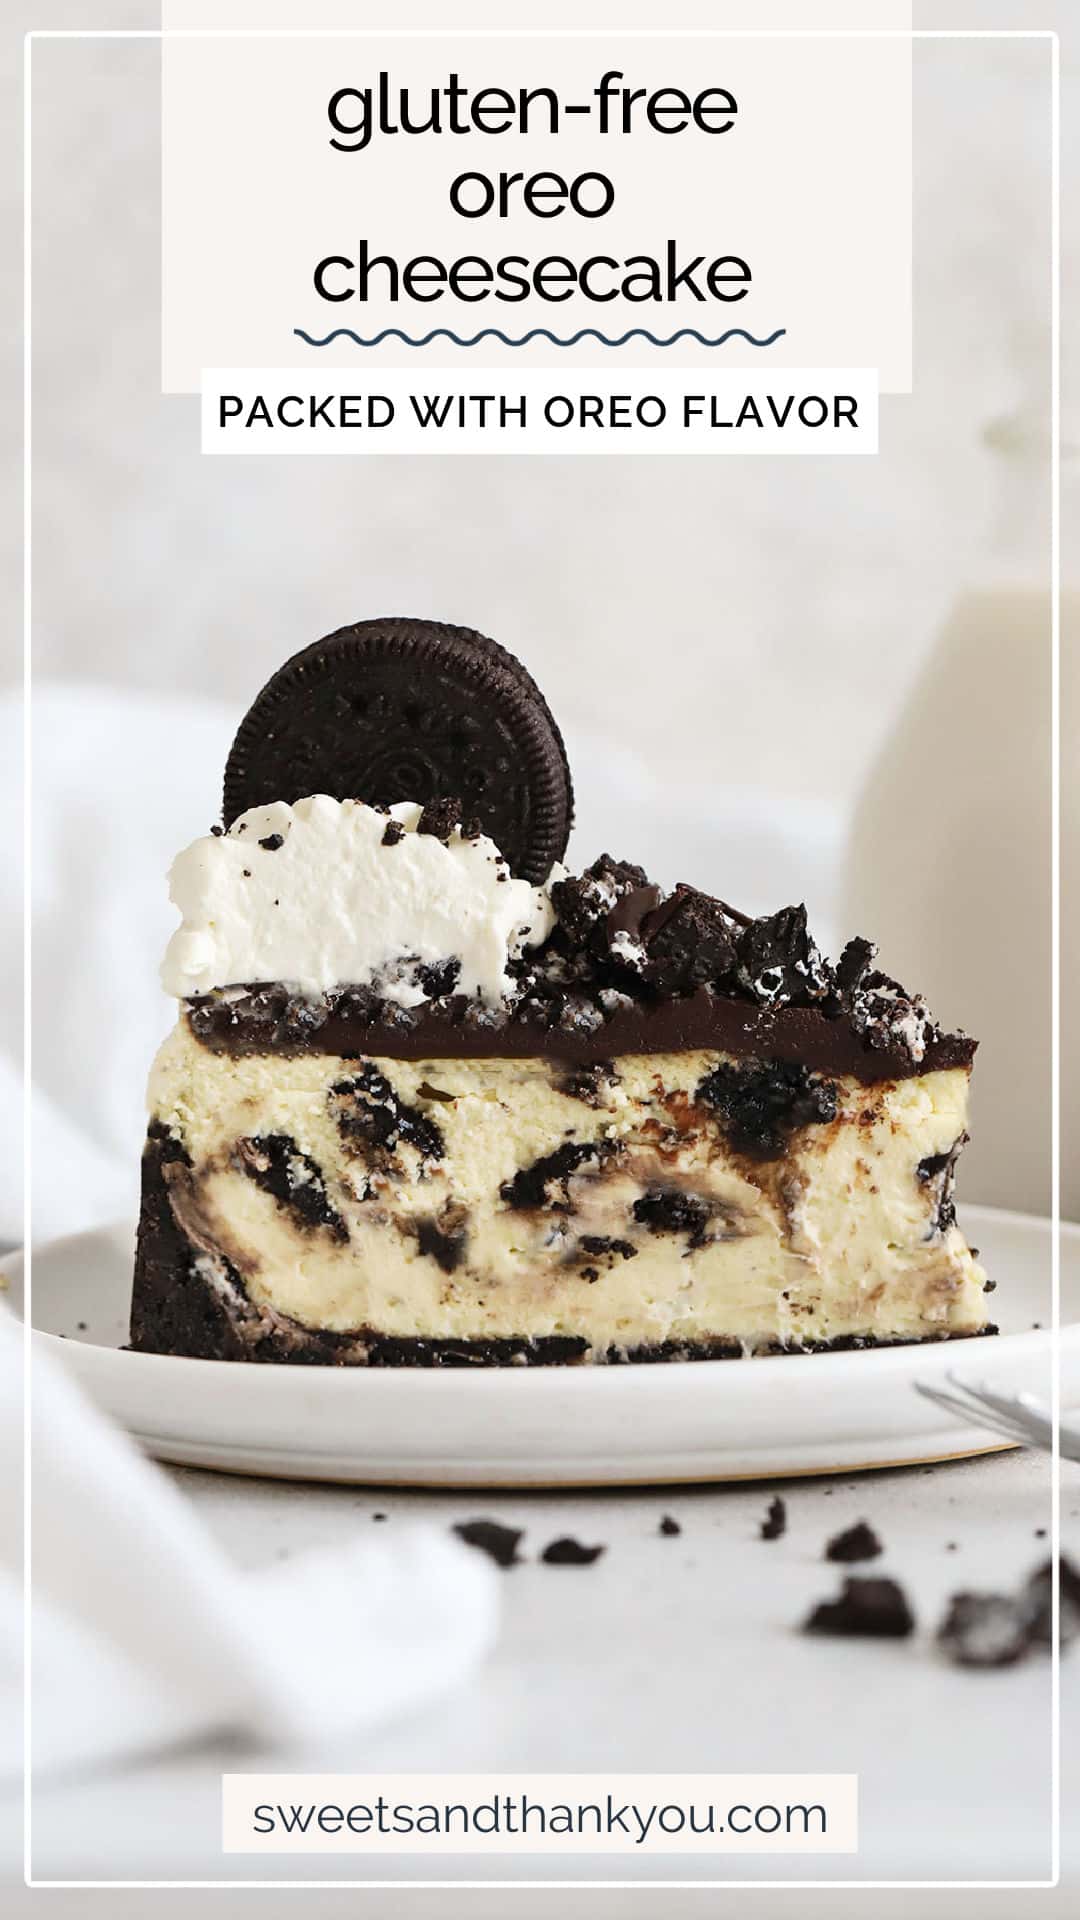 Our Gluten-Free Oreo Cheesecake recipe is a DREAM dessert for cookies & cream lovers! It's packed with with Oreo cookie flavor in every layer! / gluten-free oreo dessert recipes / gluten-free thanksgiving dessert / gluten-free cheesecake recipe / gluten-free holiday dessert / gluten-free birthday cake / gluten-free cake / gluten-free pie / the best oreo cheesecake recipe / easy oreo cheesecake recipe / gluten-free oreo cheesecake crust